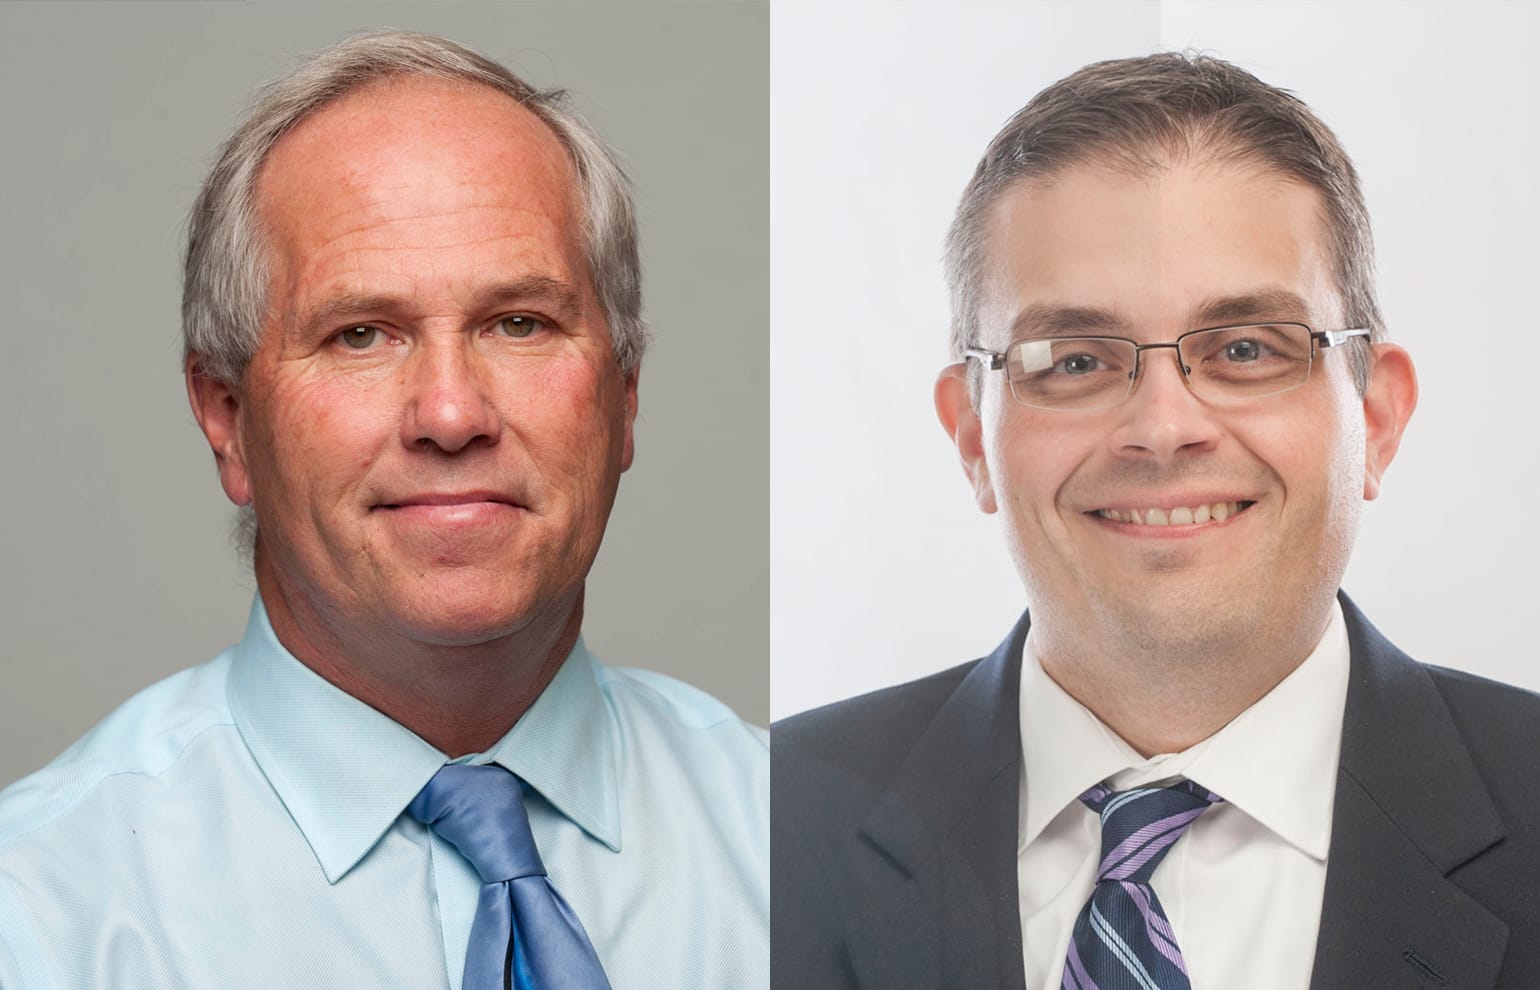 Marc Boldt (left), no party preference, and Mike Dalesandro, Democrat, are running for Clark County council chair.